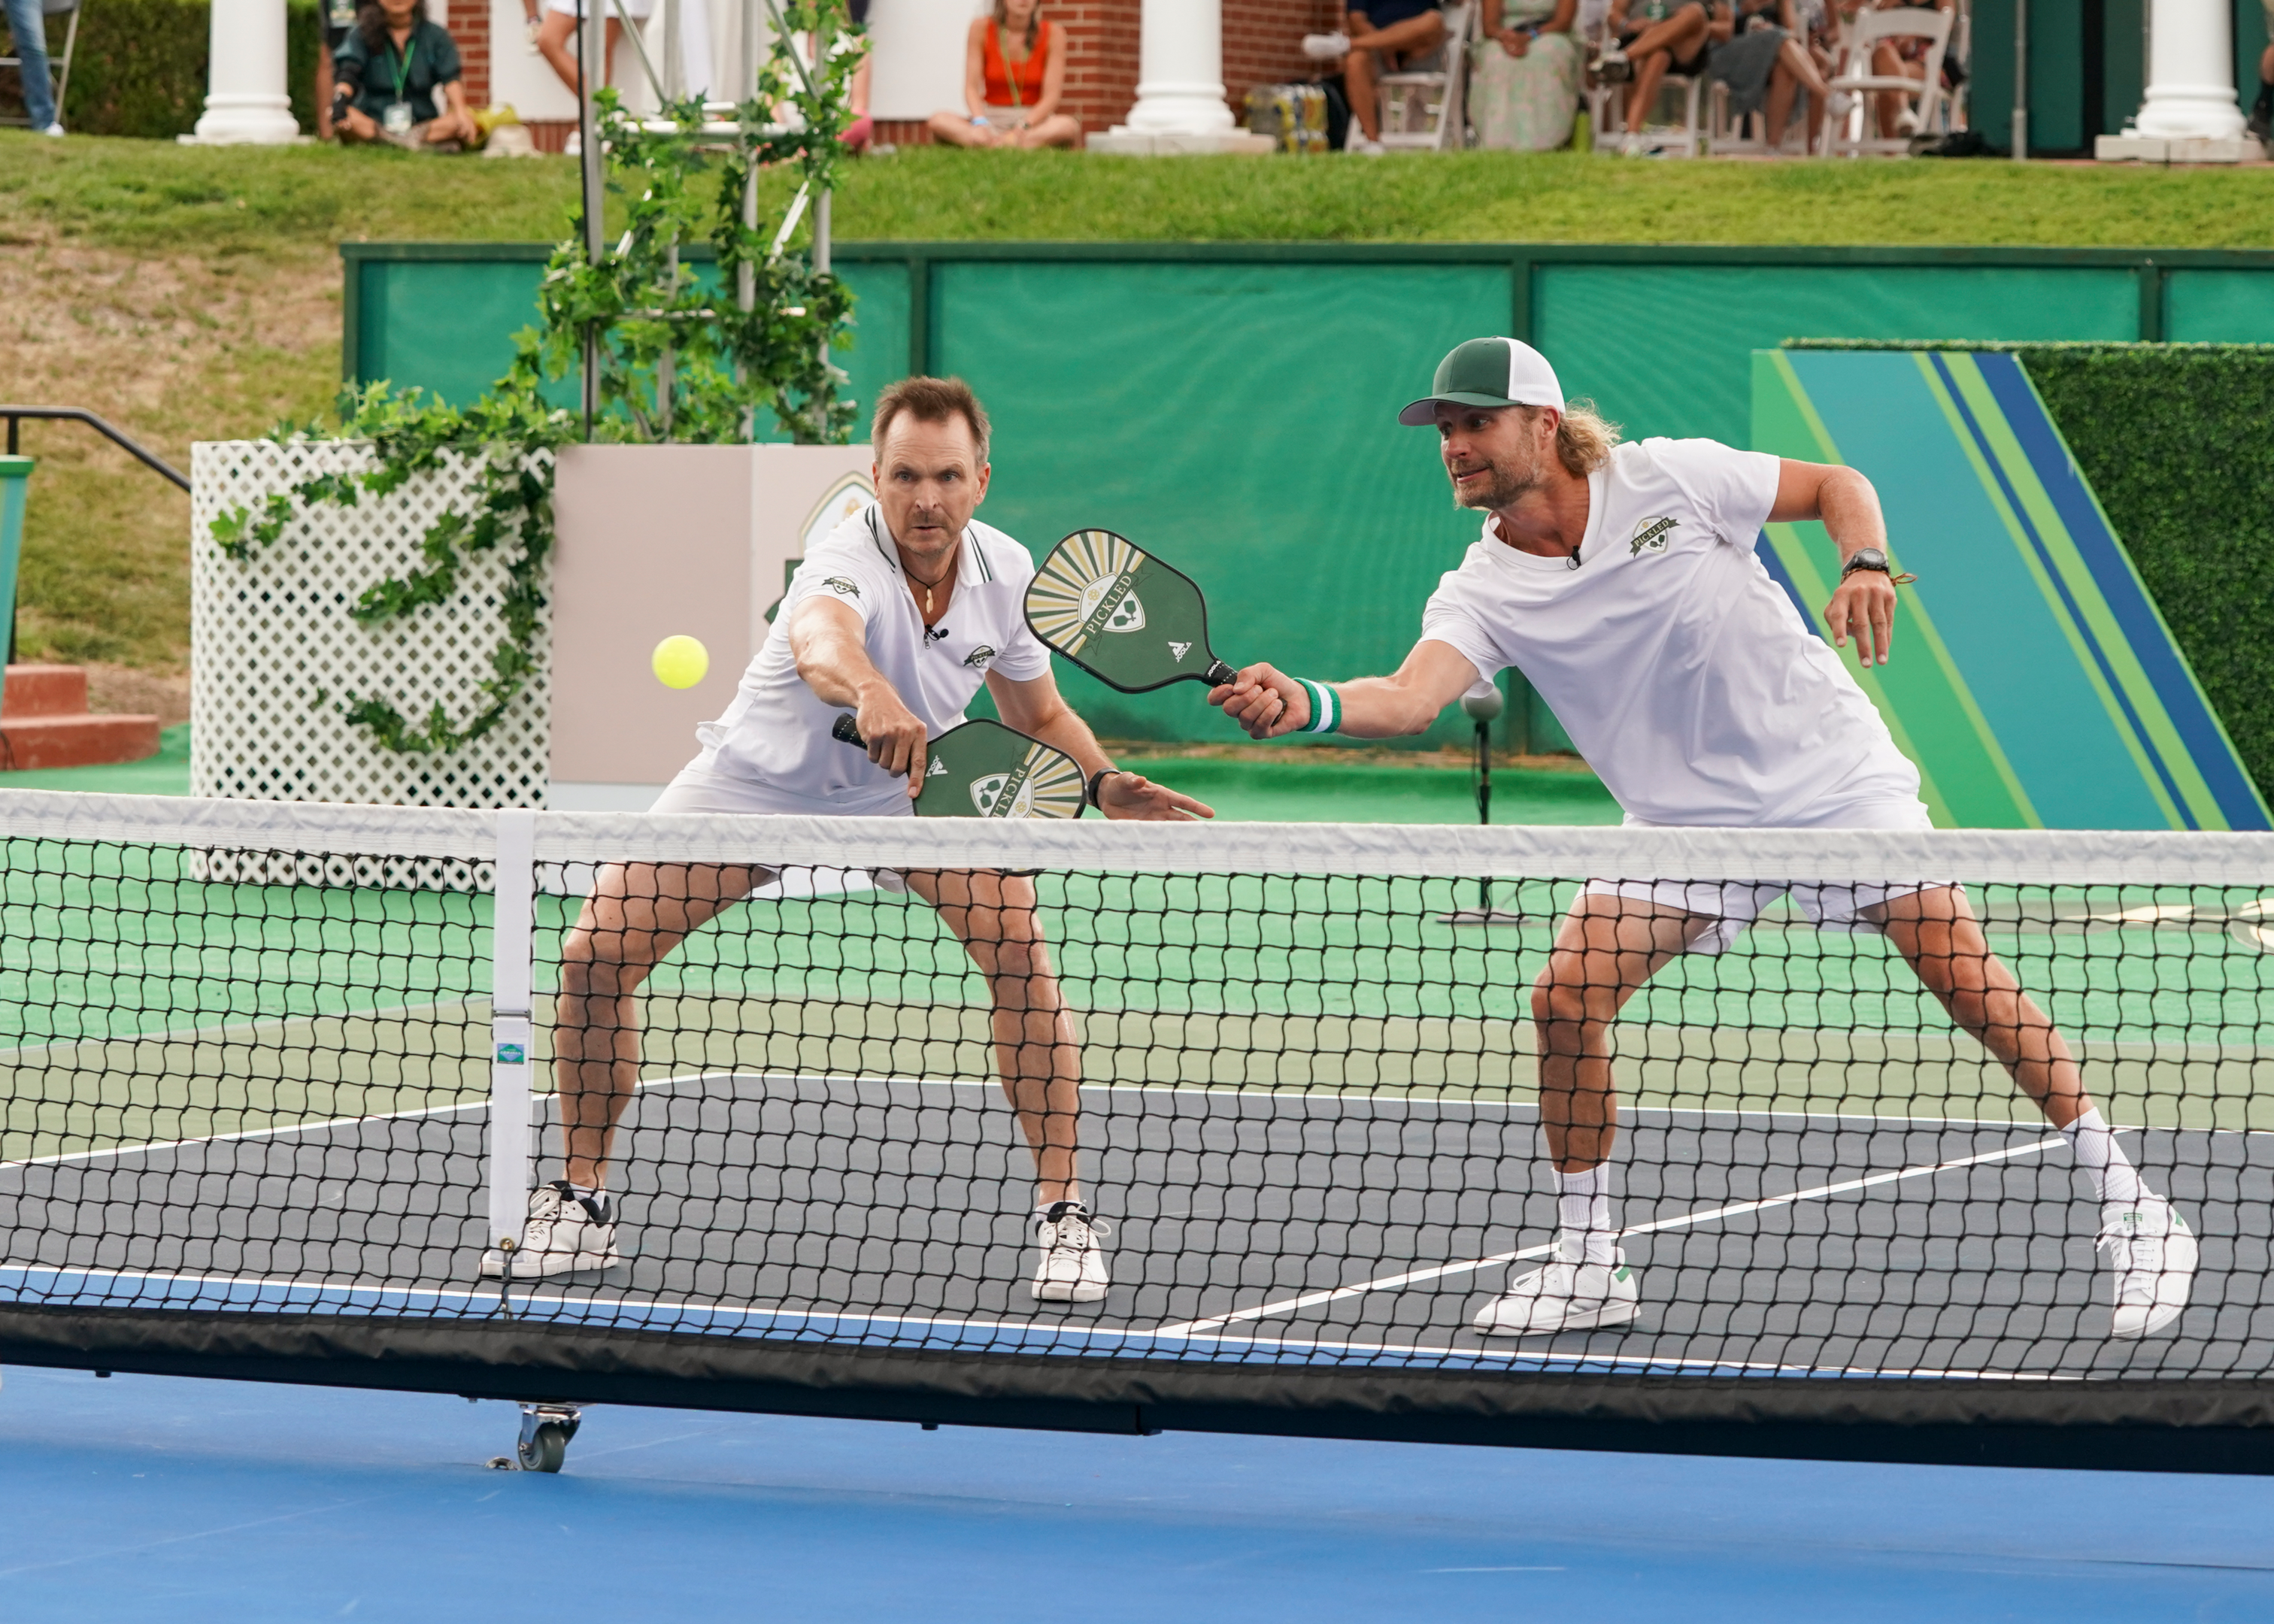 Two players playing pickleball on a court with net